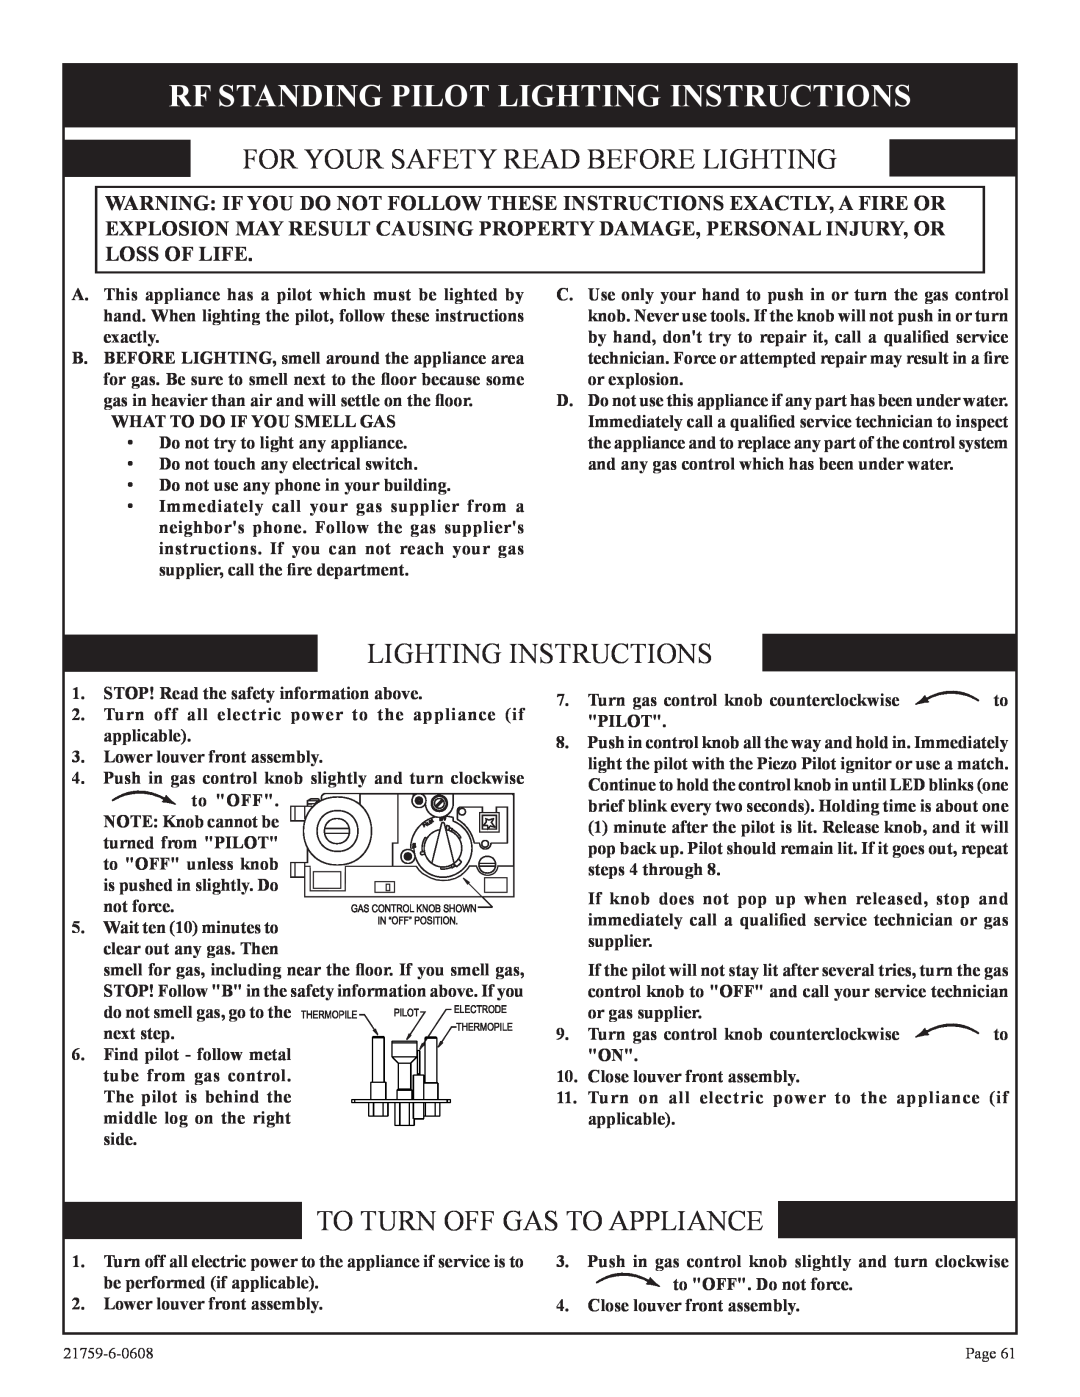 Empire Comfort Systems DVP42FP Rf Standing Pilot Lighting Instructions, For Your Safety Read Before Lighting, next step 